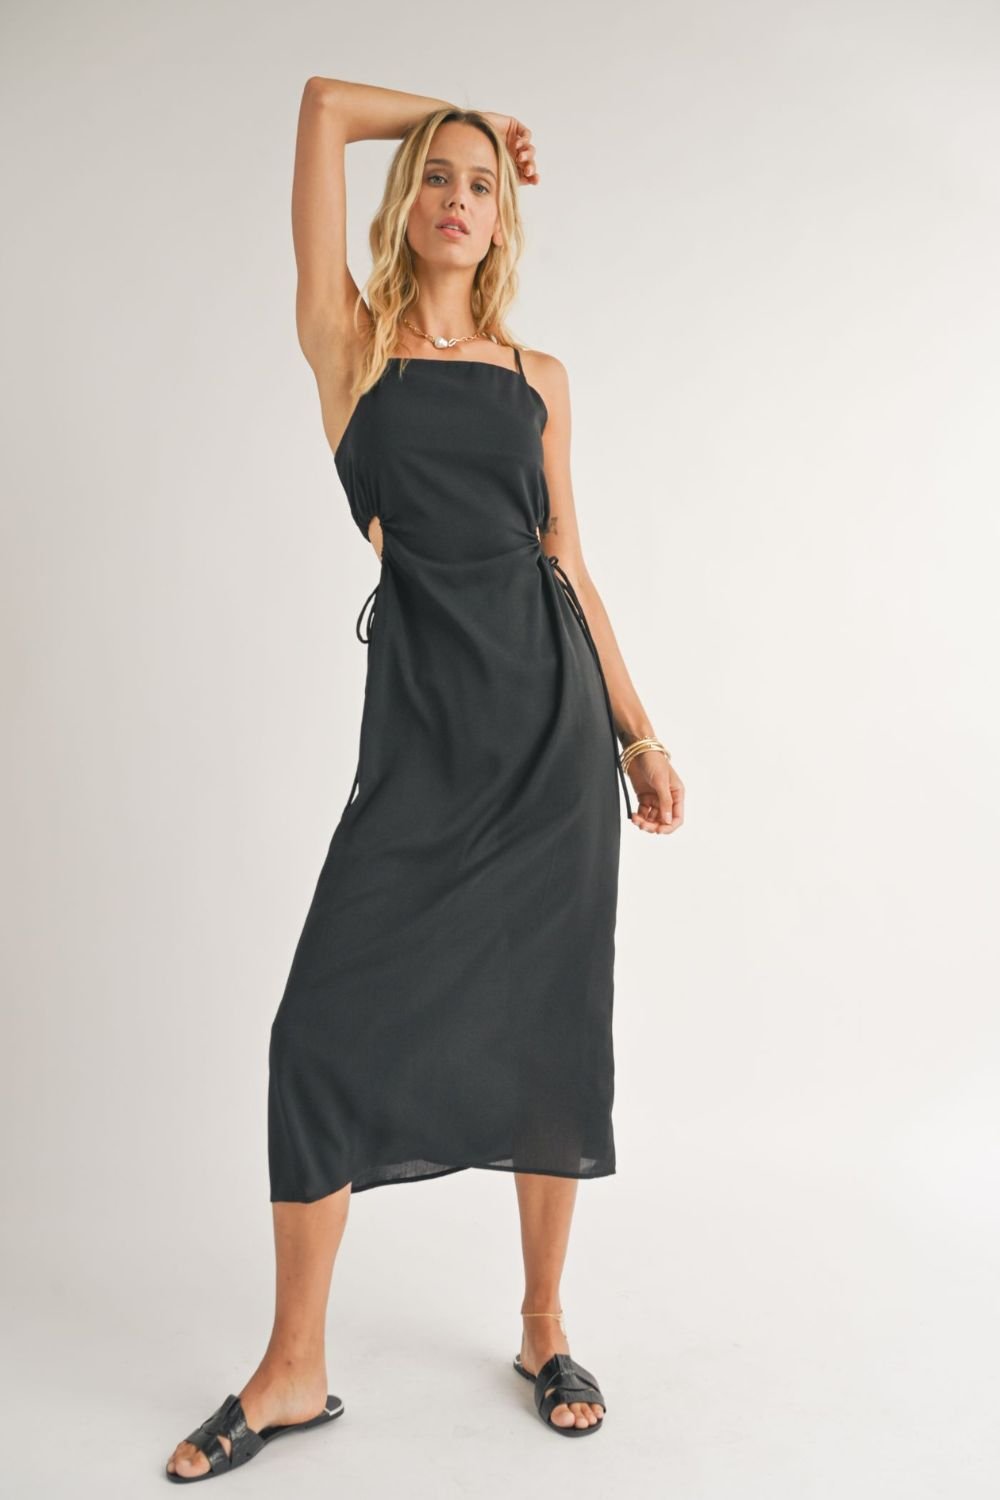 Women's Side Cut Out Summer Midi Dress | Black - Women's Dresses - Blooming Daily